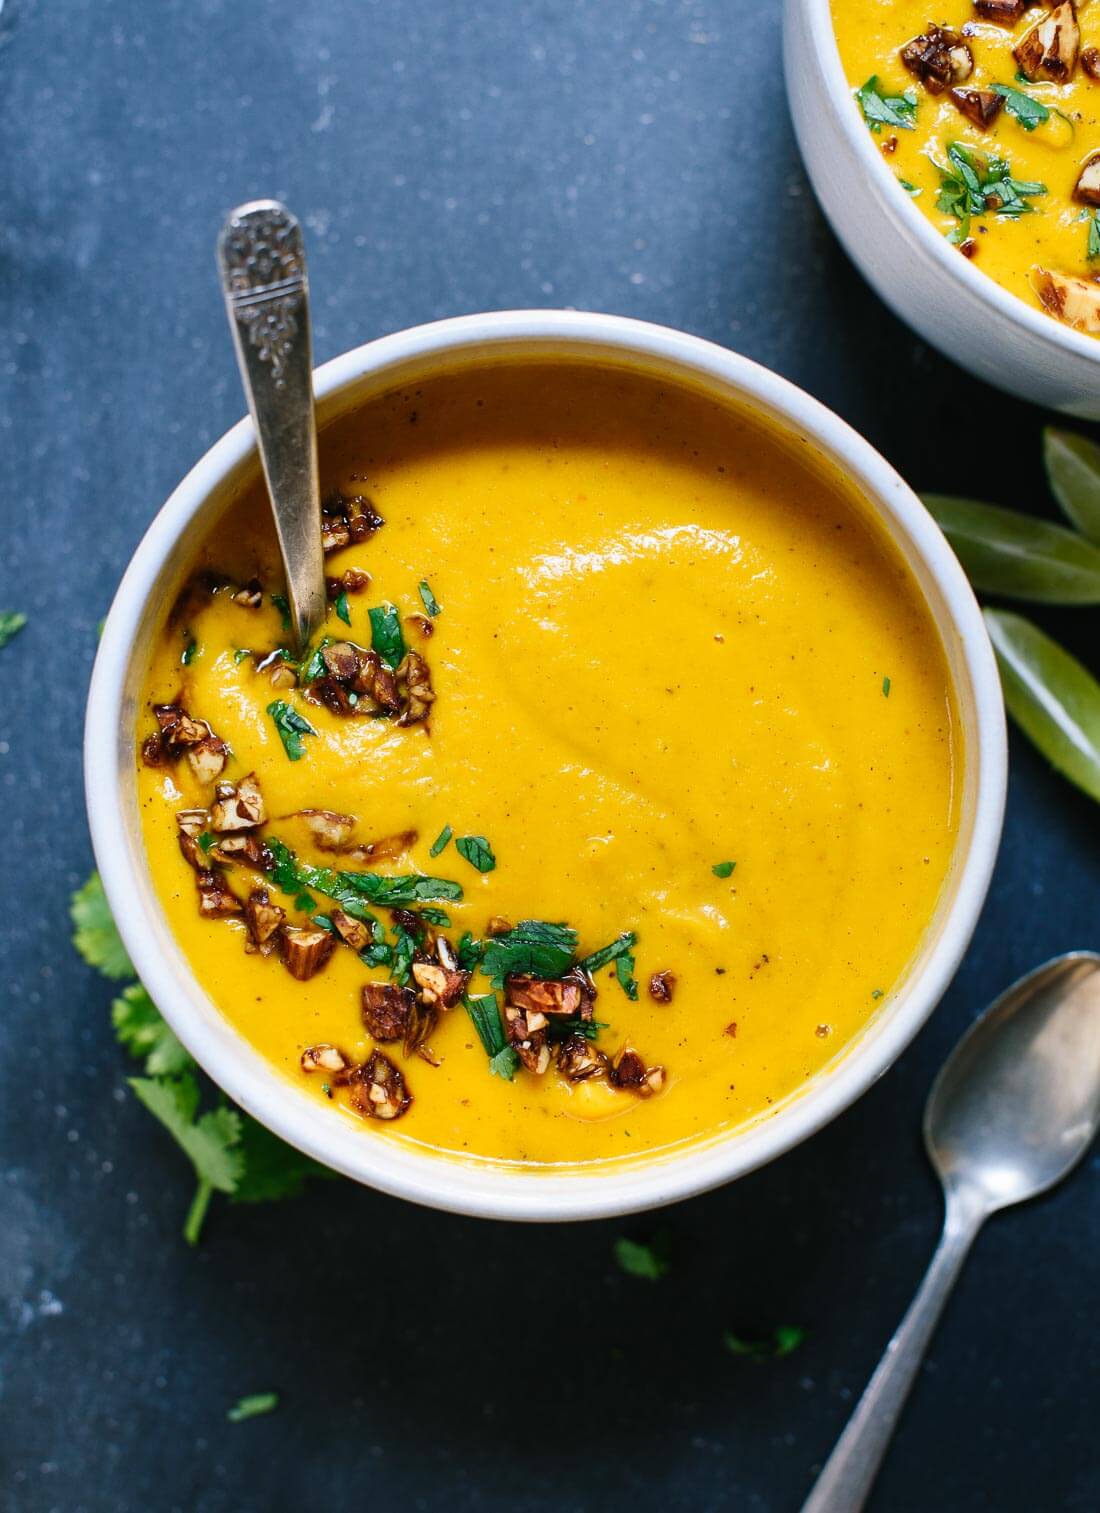 This creamy, Thai carrot and sweet potato soup will warm you up on cold days. It's filling and full of nutritious ingredients. cookieandkate.com